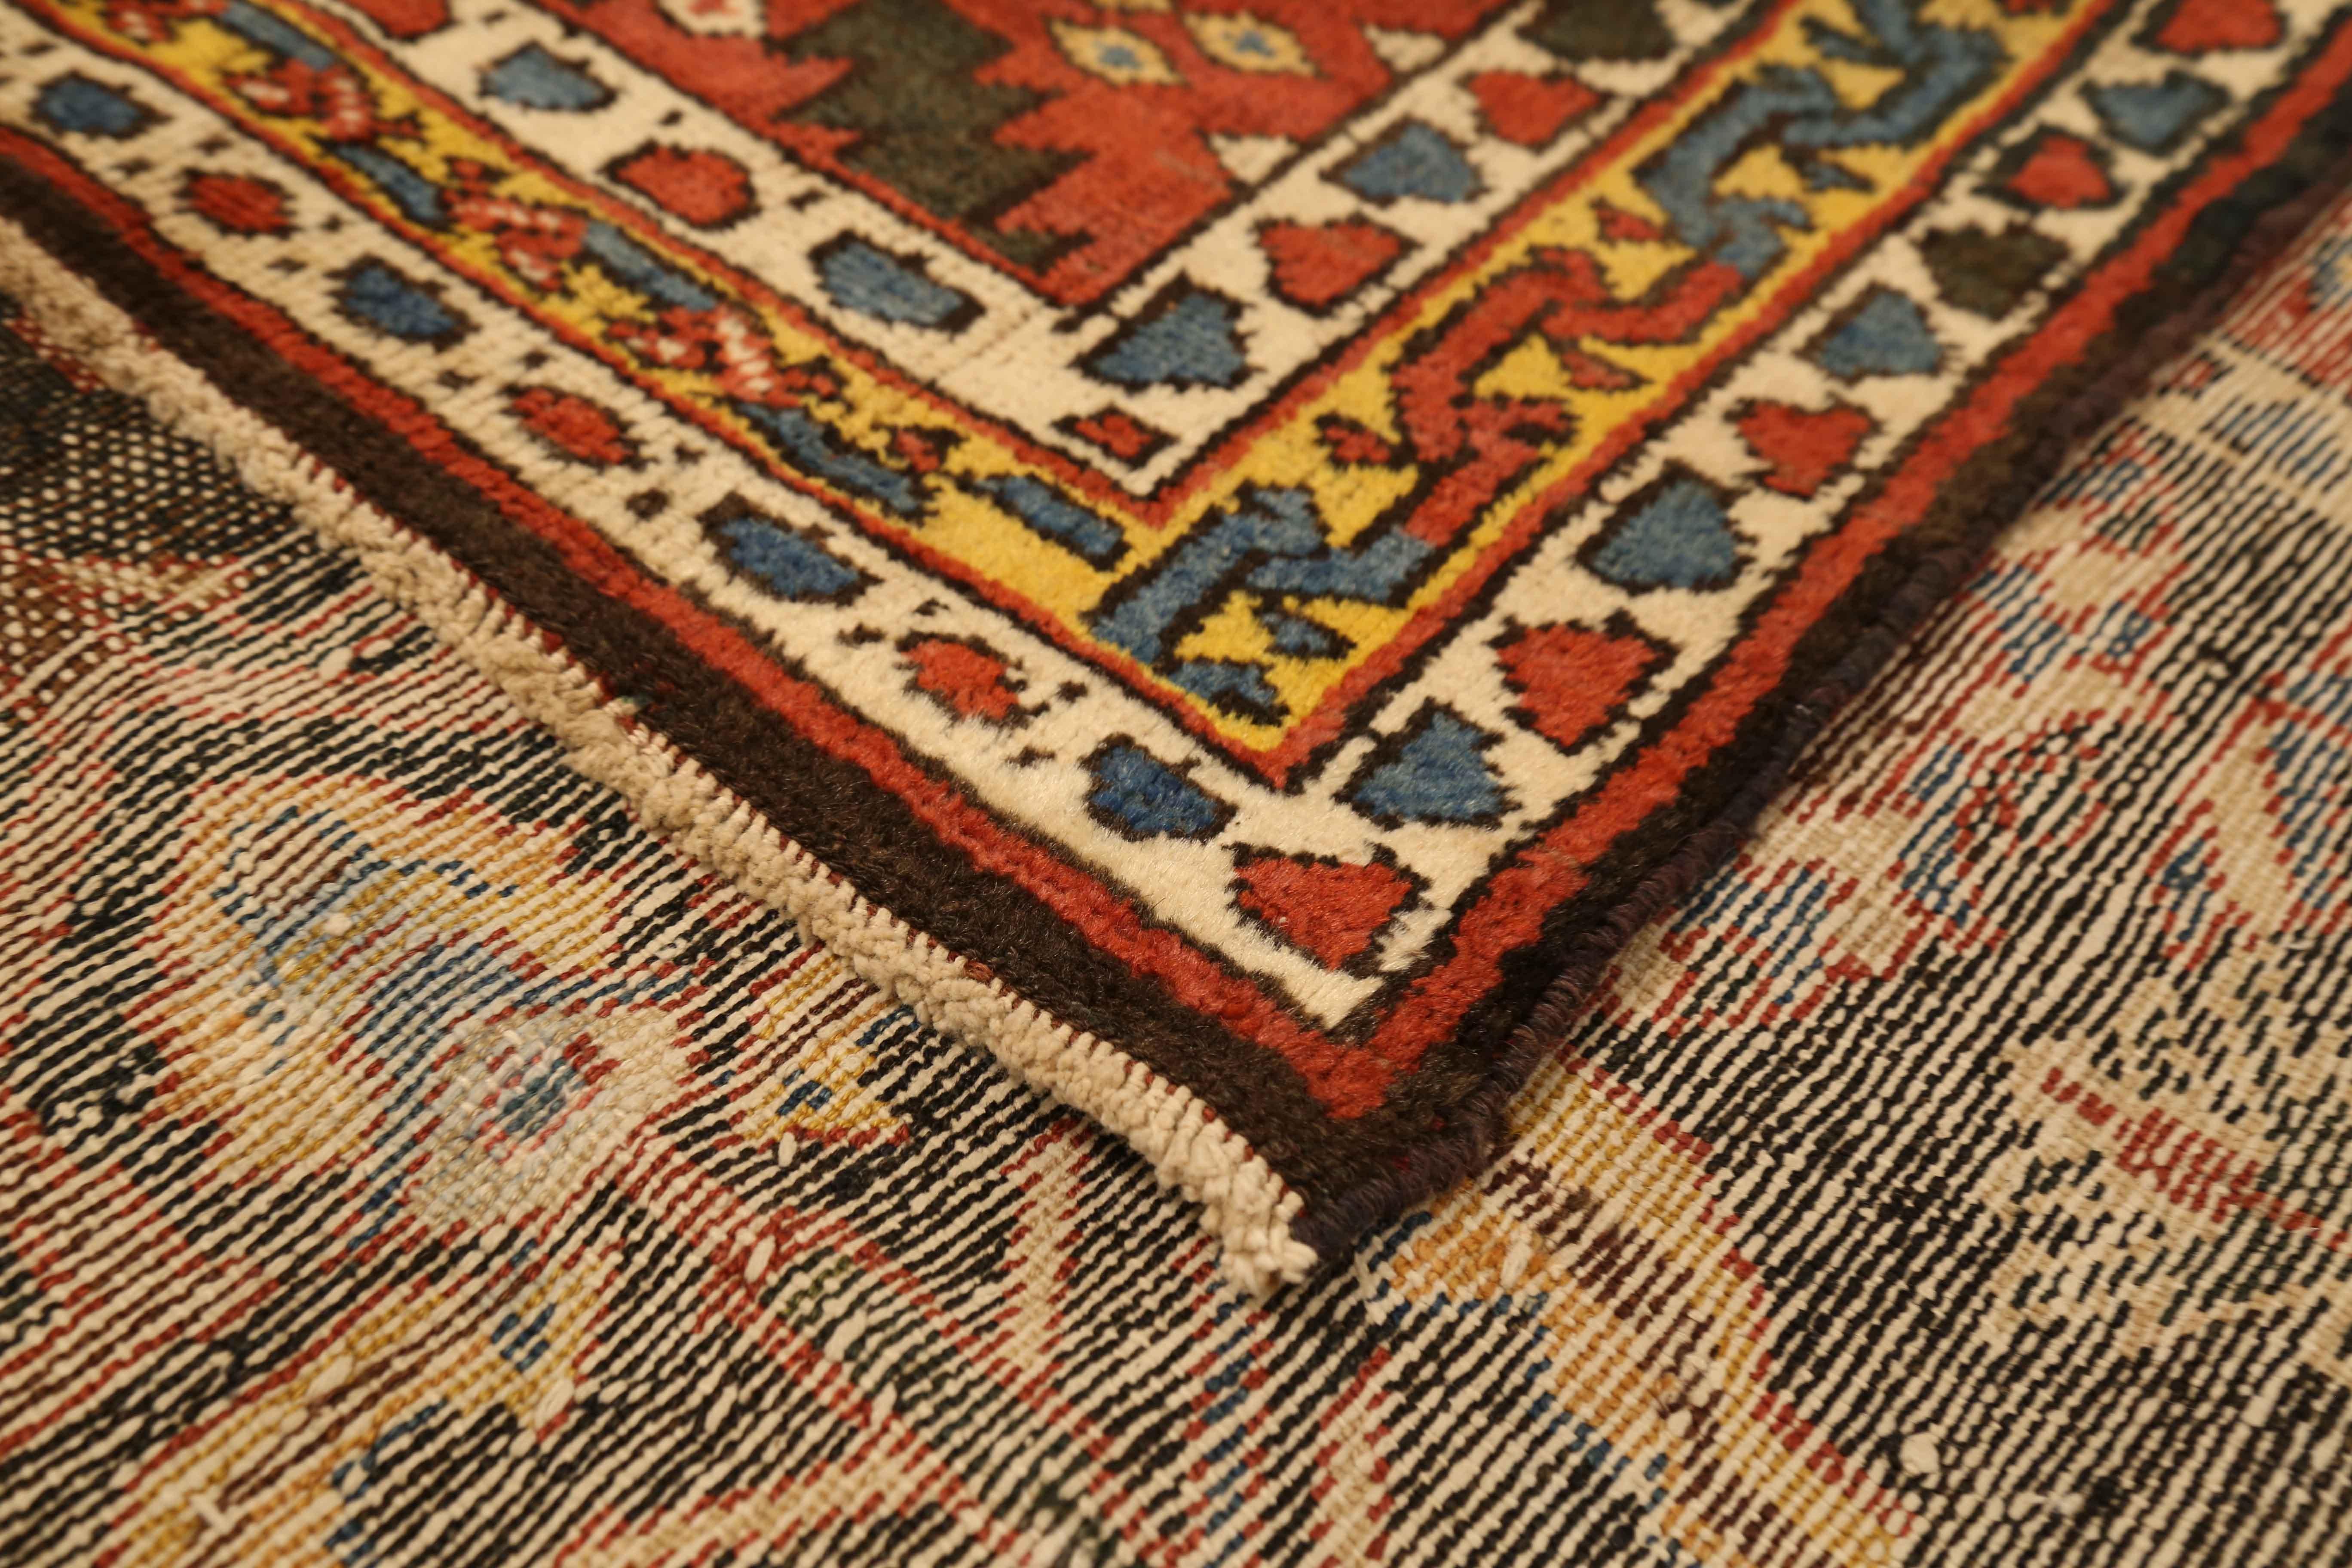 Antique Persian rug handwoven from the finest sheep’s wool and colored with all-natural vegetable dyes that are safe for humans and pets. It’s a traditional Bakhtiar design highlighted by diamond medallions in red, ivory, and blue over a black